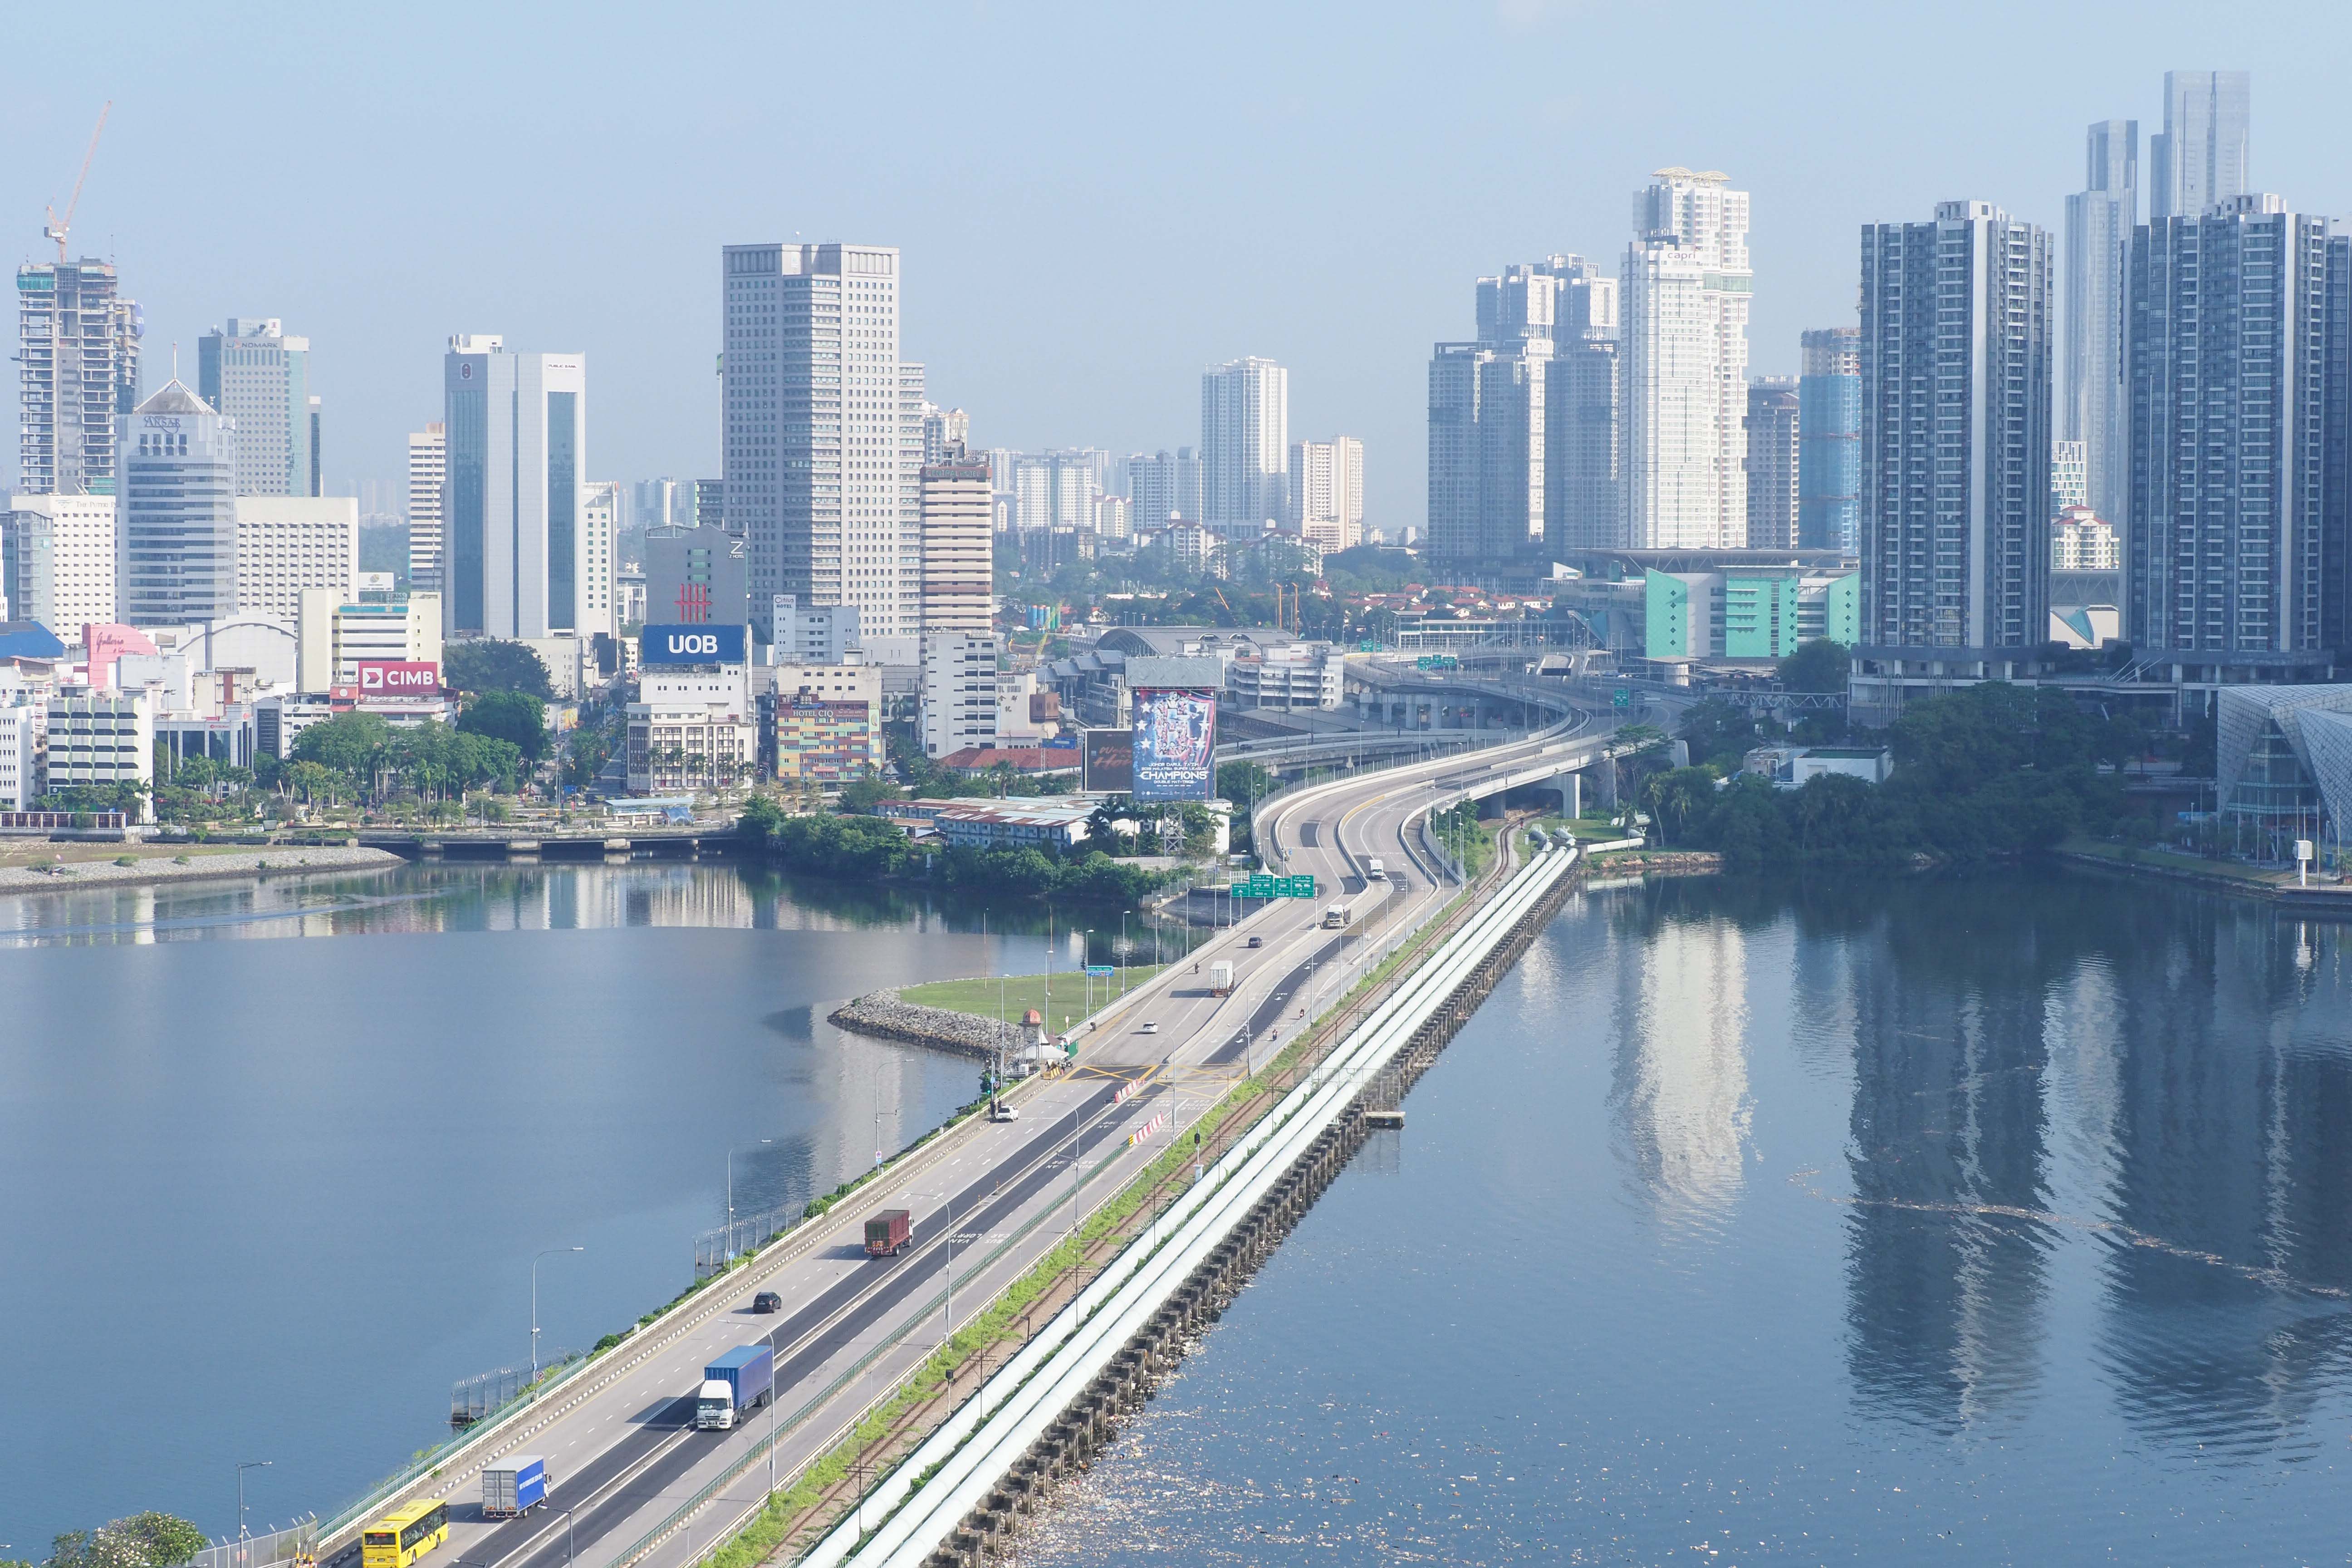 A view of the Causeway after traffic passes Singapore's Woodlands Checkpoint to head to Johor Baru, Malaysia.